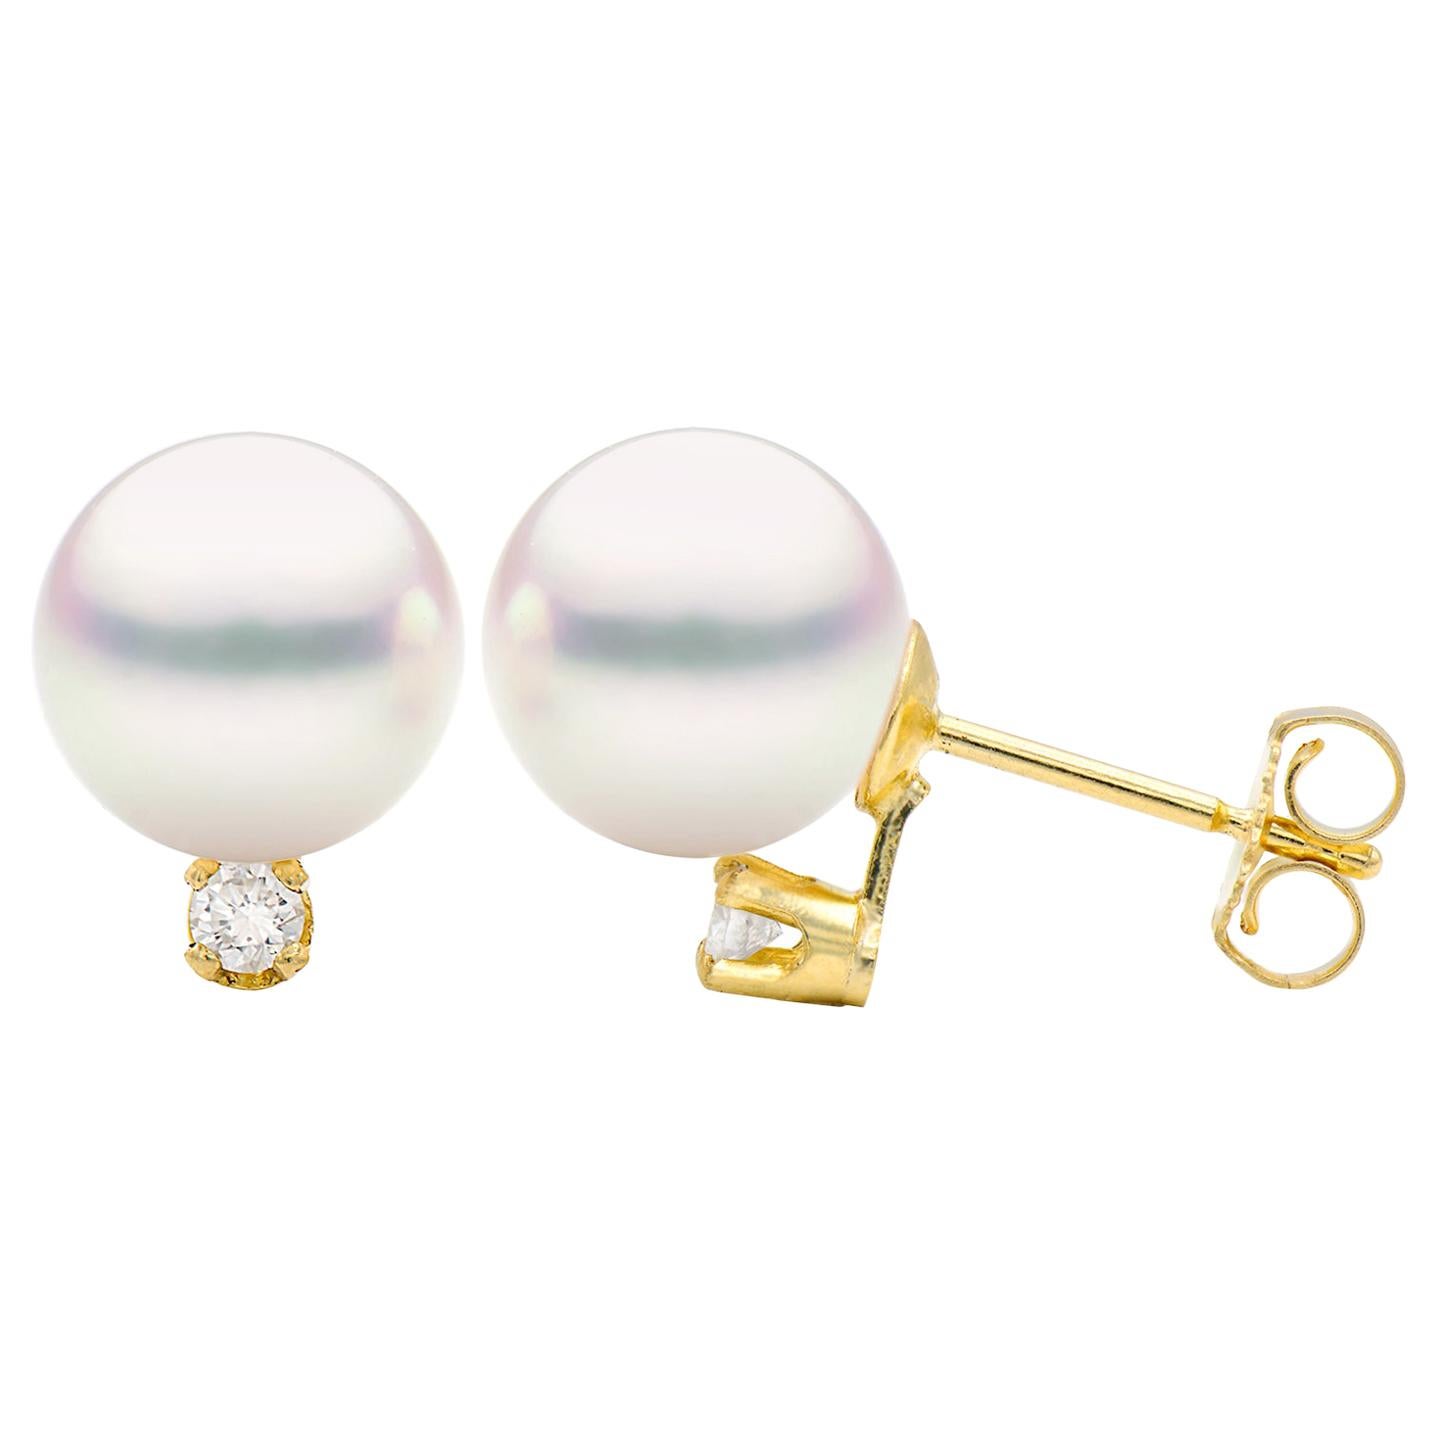 6.5-7mm White Cultured Pearl Stud Earring with Diamond in 14 Karat Yellow Gold